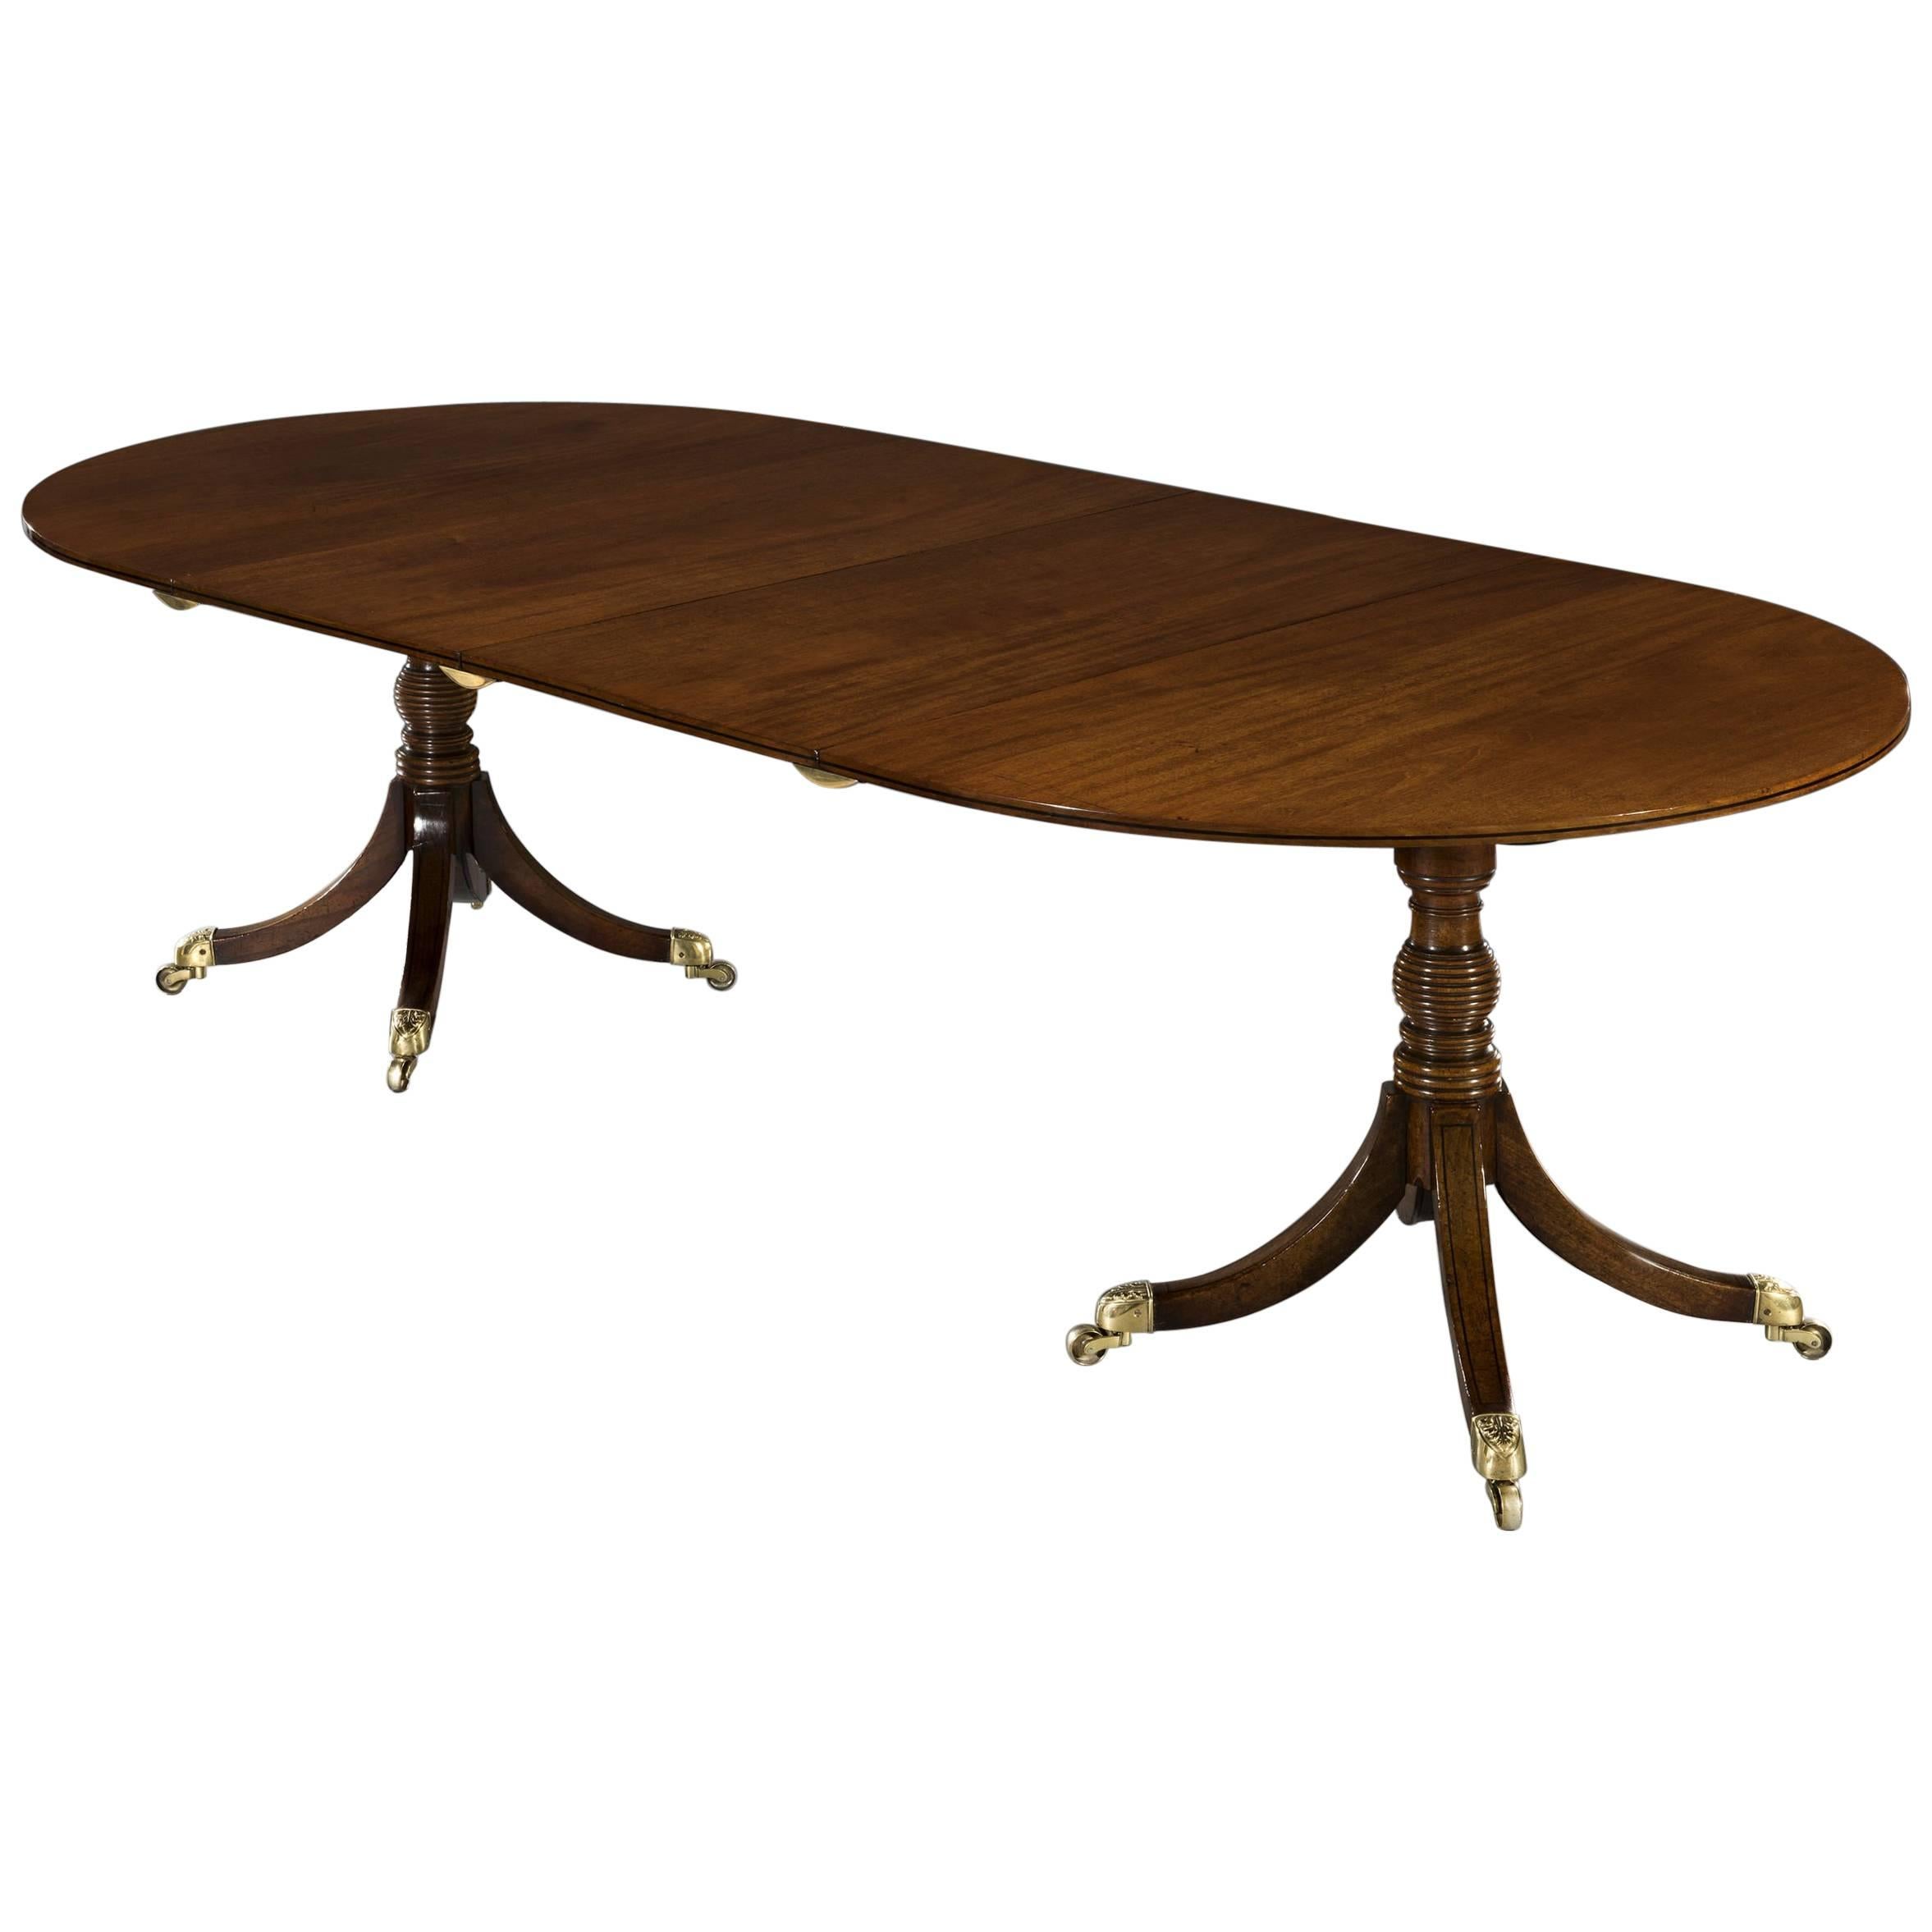 Georgian Period Mahogany Twin Pedestal Dining Table of Elegant Proportions